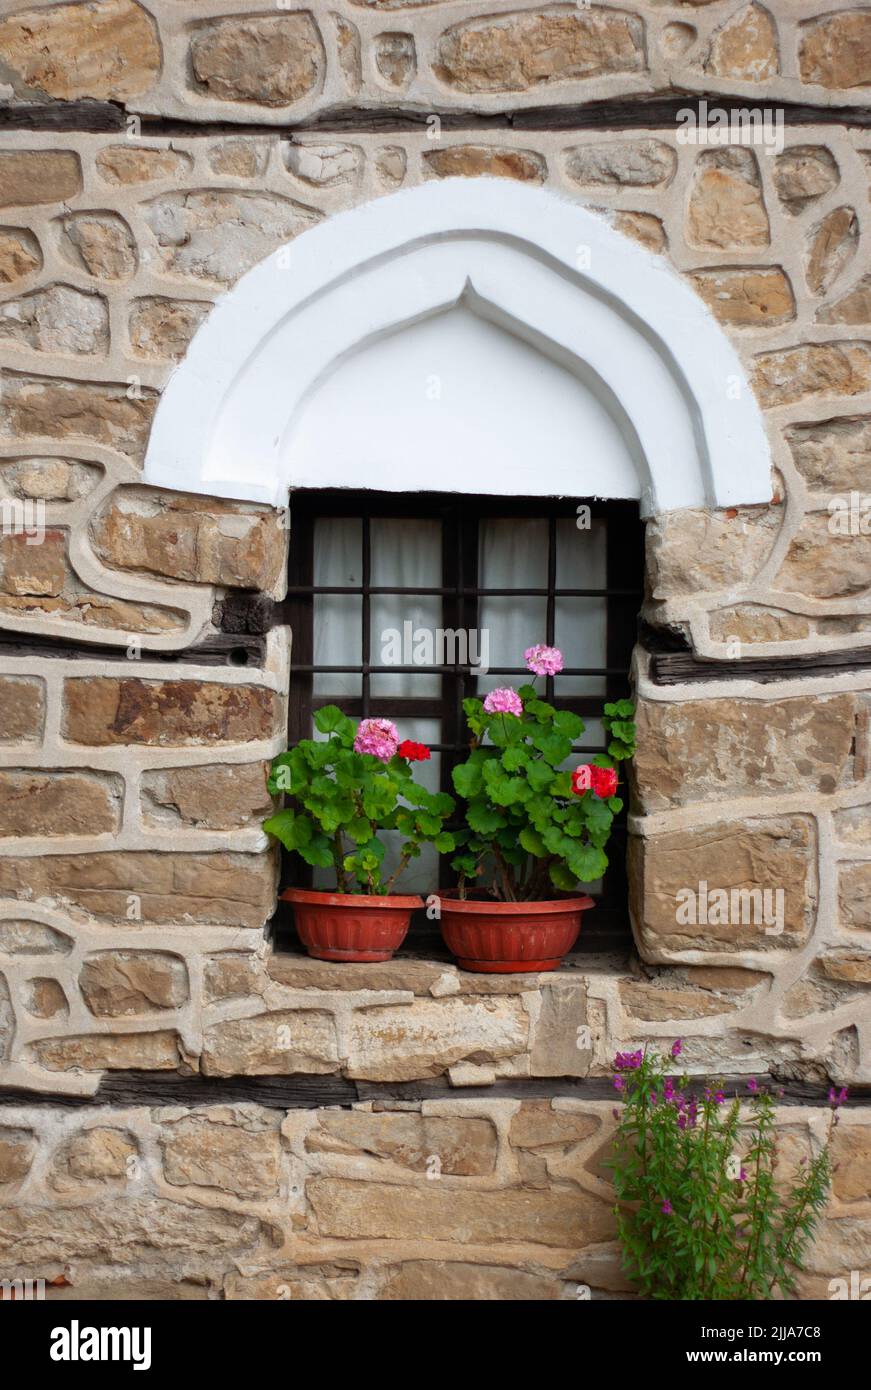 Medieval Architecture window treatment rebuilt in Arbanasi, Bulgaria, site of a 12th century fortress. The stone work was done using found materials. Stock Photo